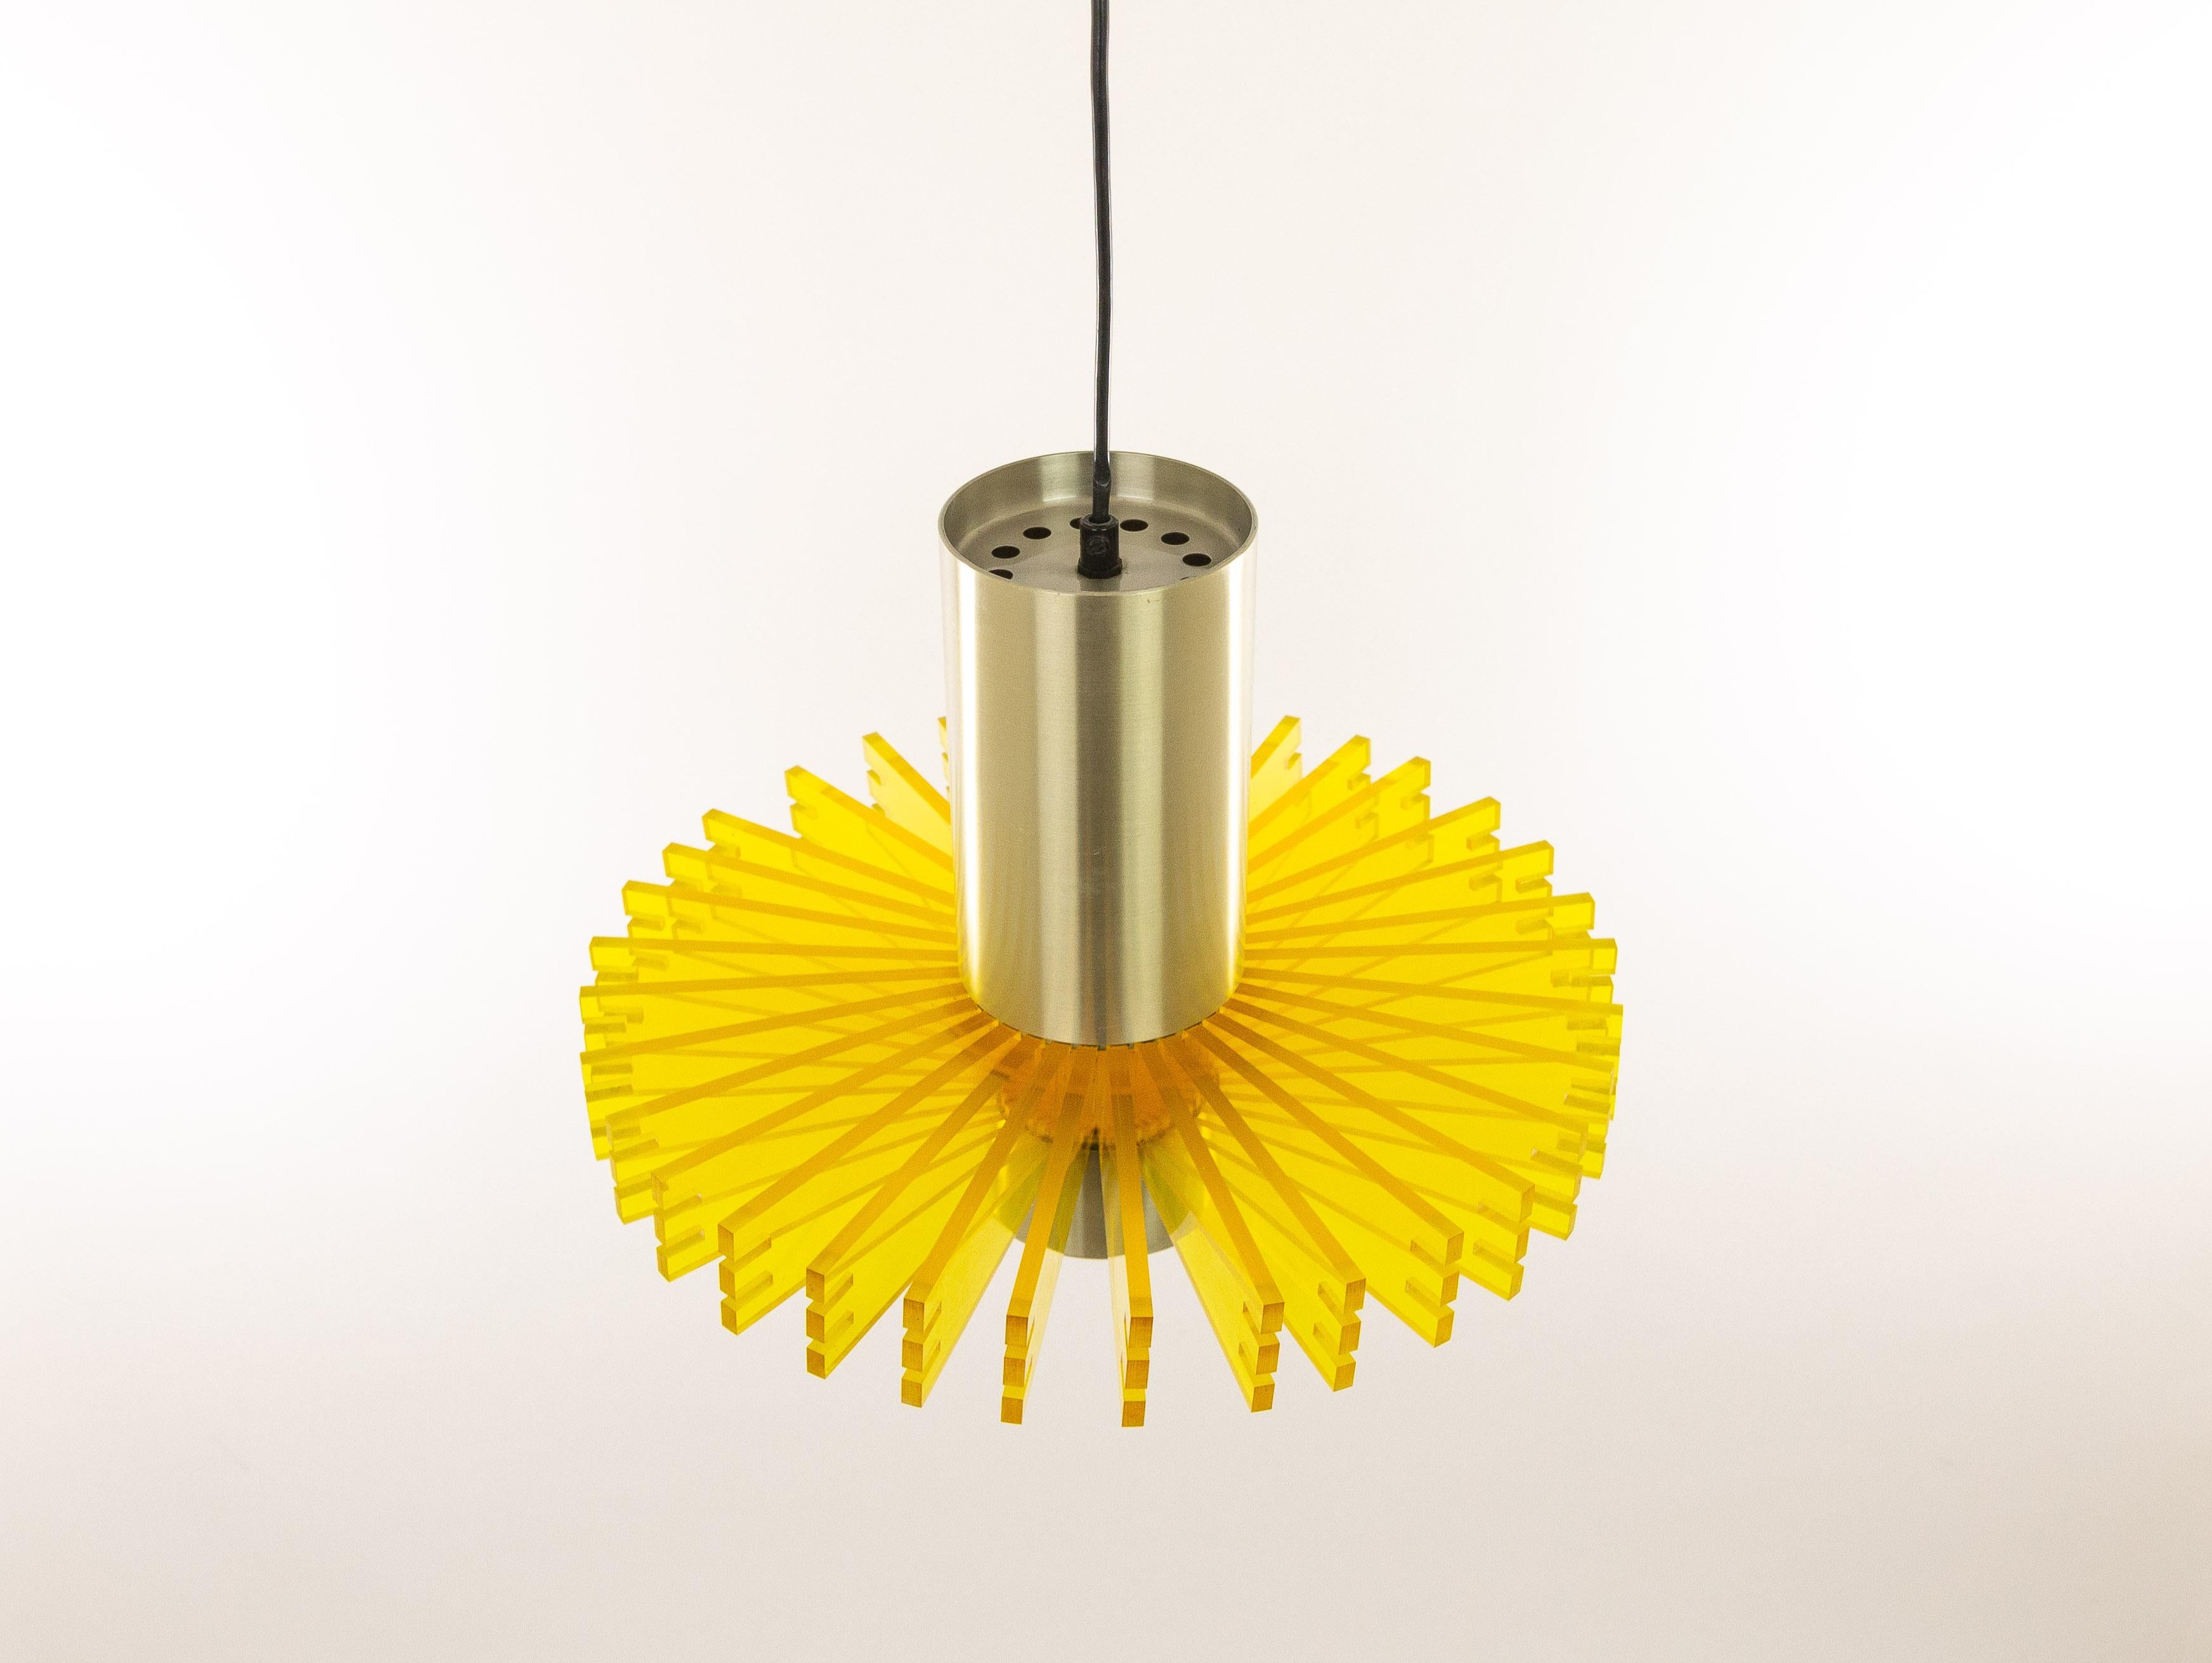 Yellow 'Priest Collar' Pendant by Claus Bolby for Cebo Industri, 1960s (Mitte des 20. Jahrhunderts)